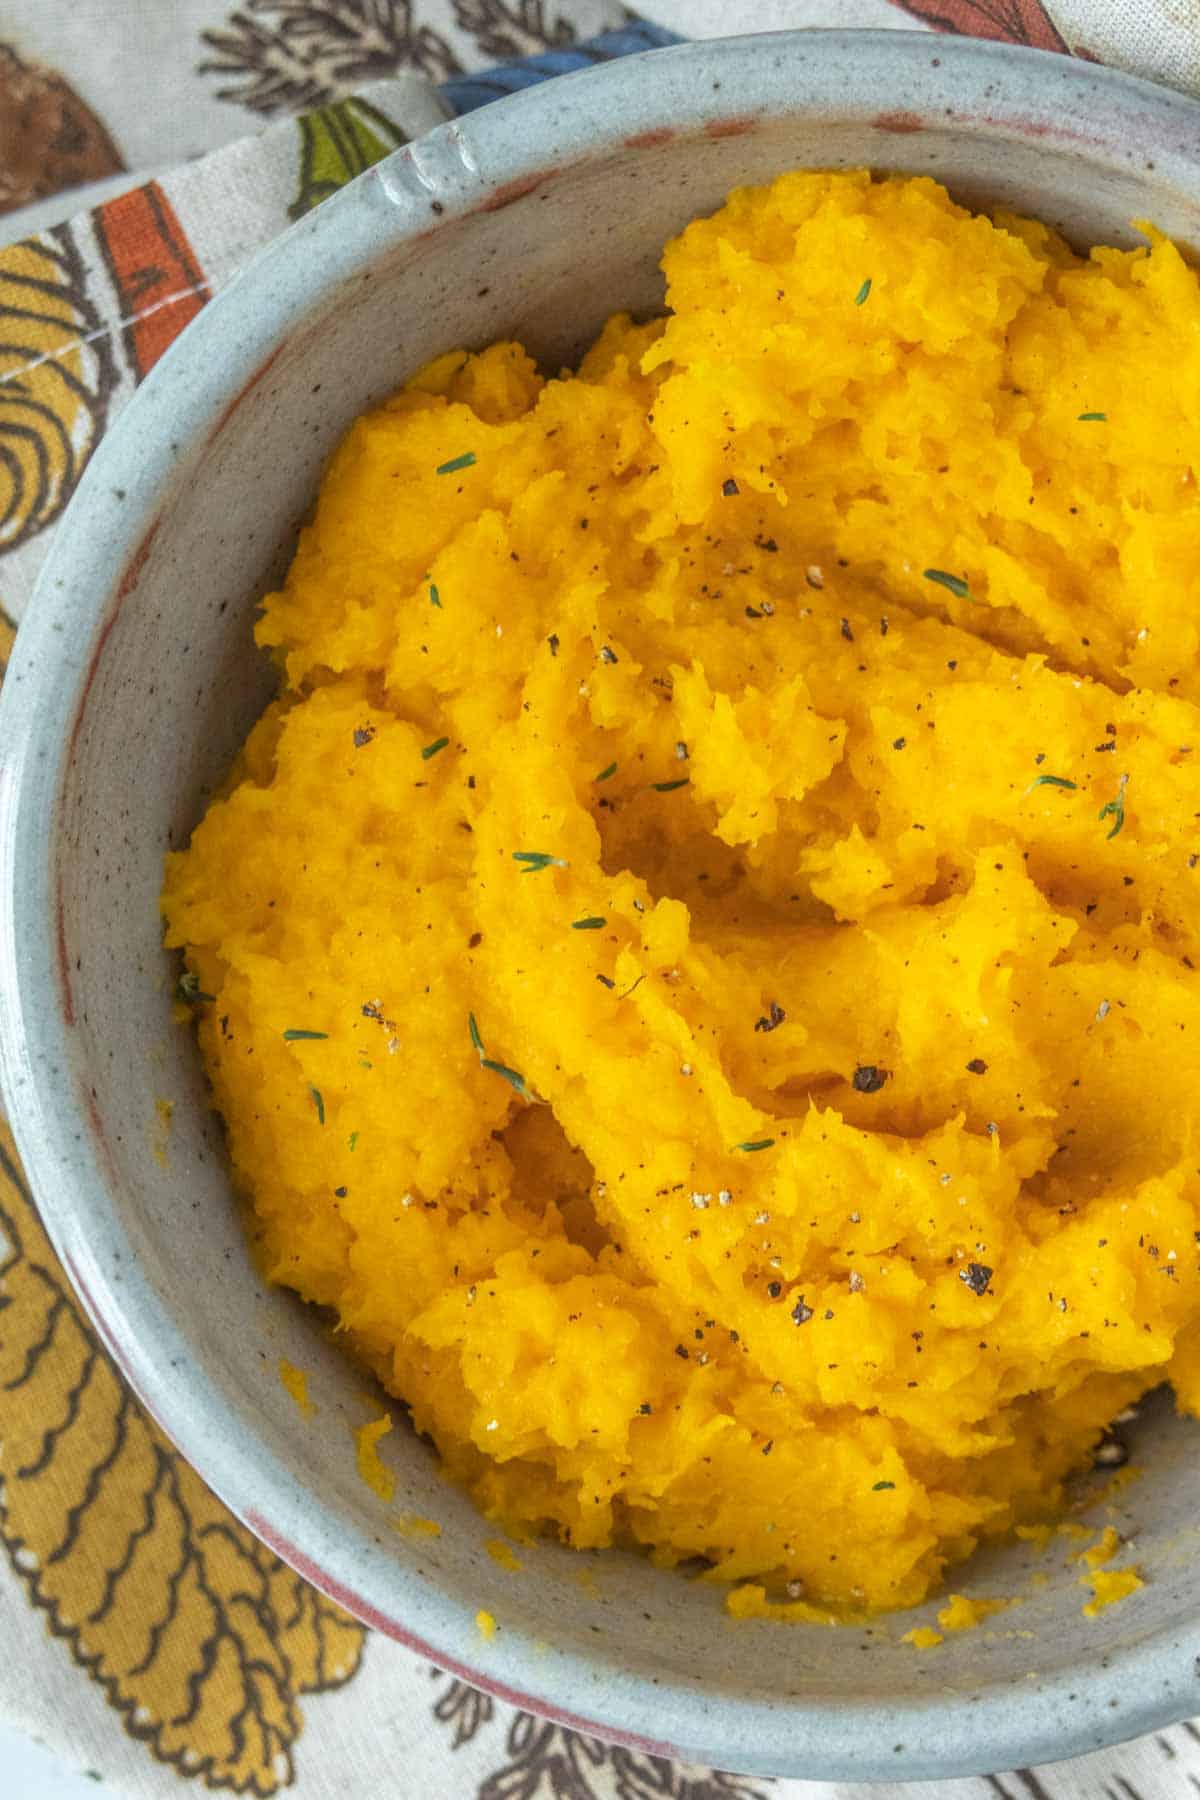 Mashed butternut squash in a bowl on a tablecloth.